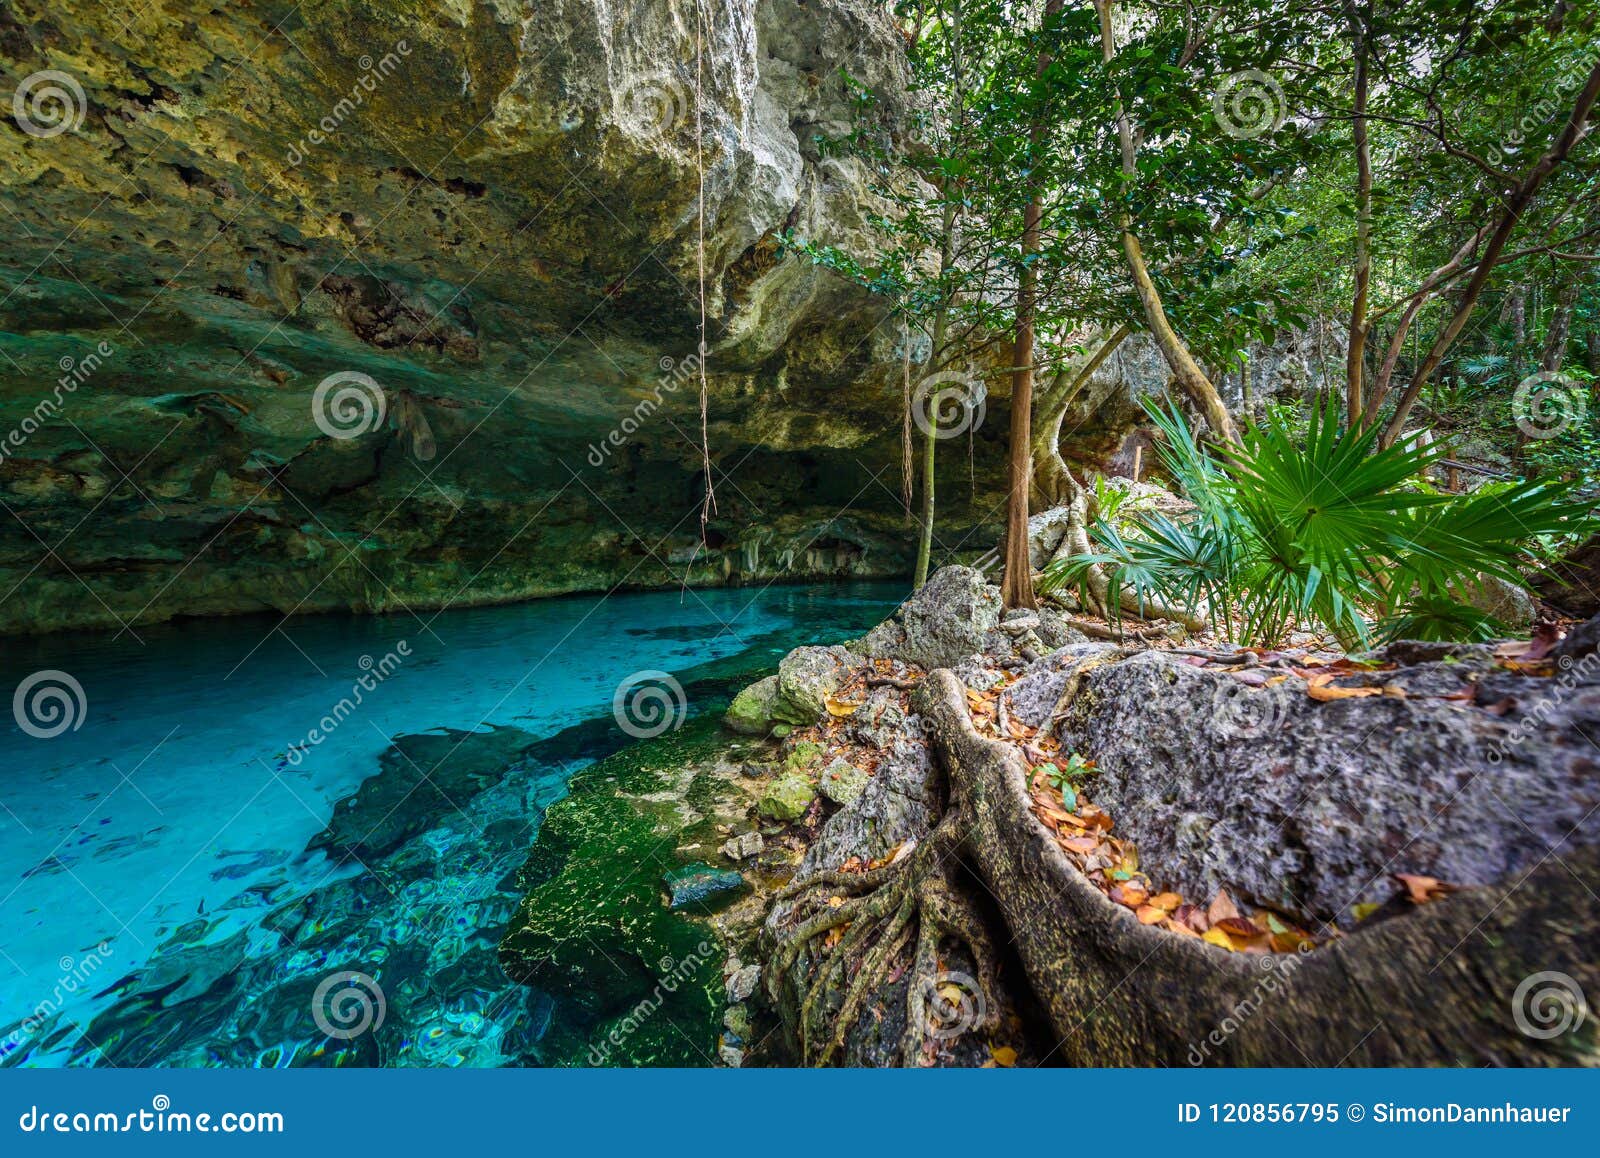 cenote dos ojos in quintana roo, mexico. people swimming and snorkeling in clear blue water. this cenote is located close to